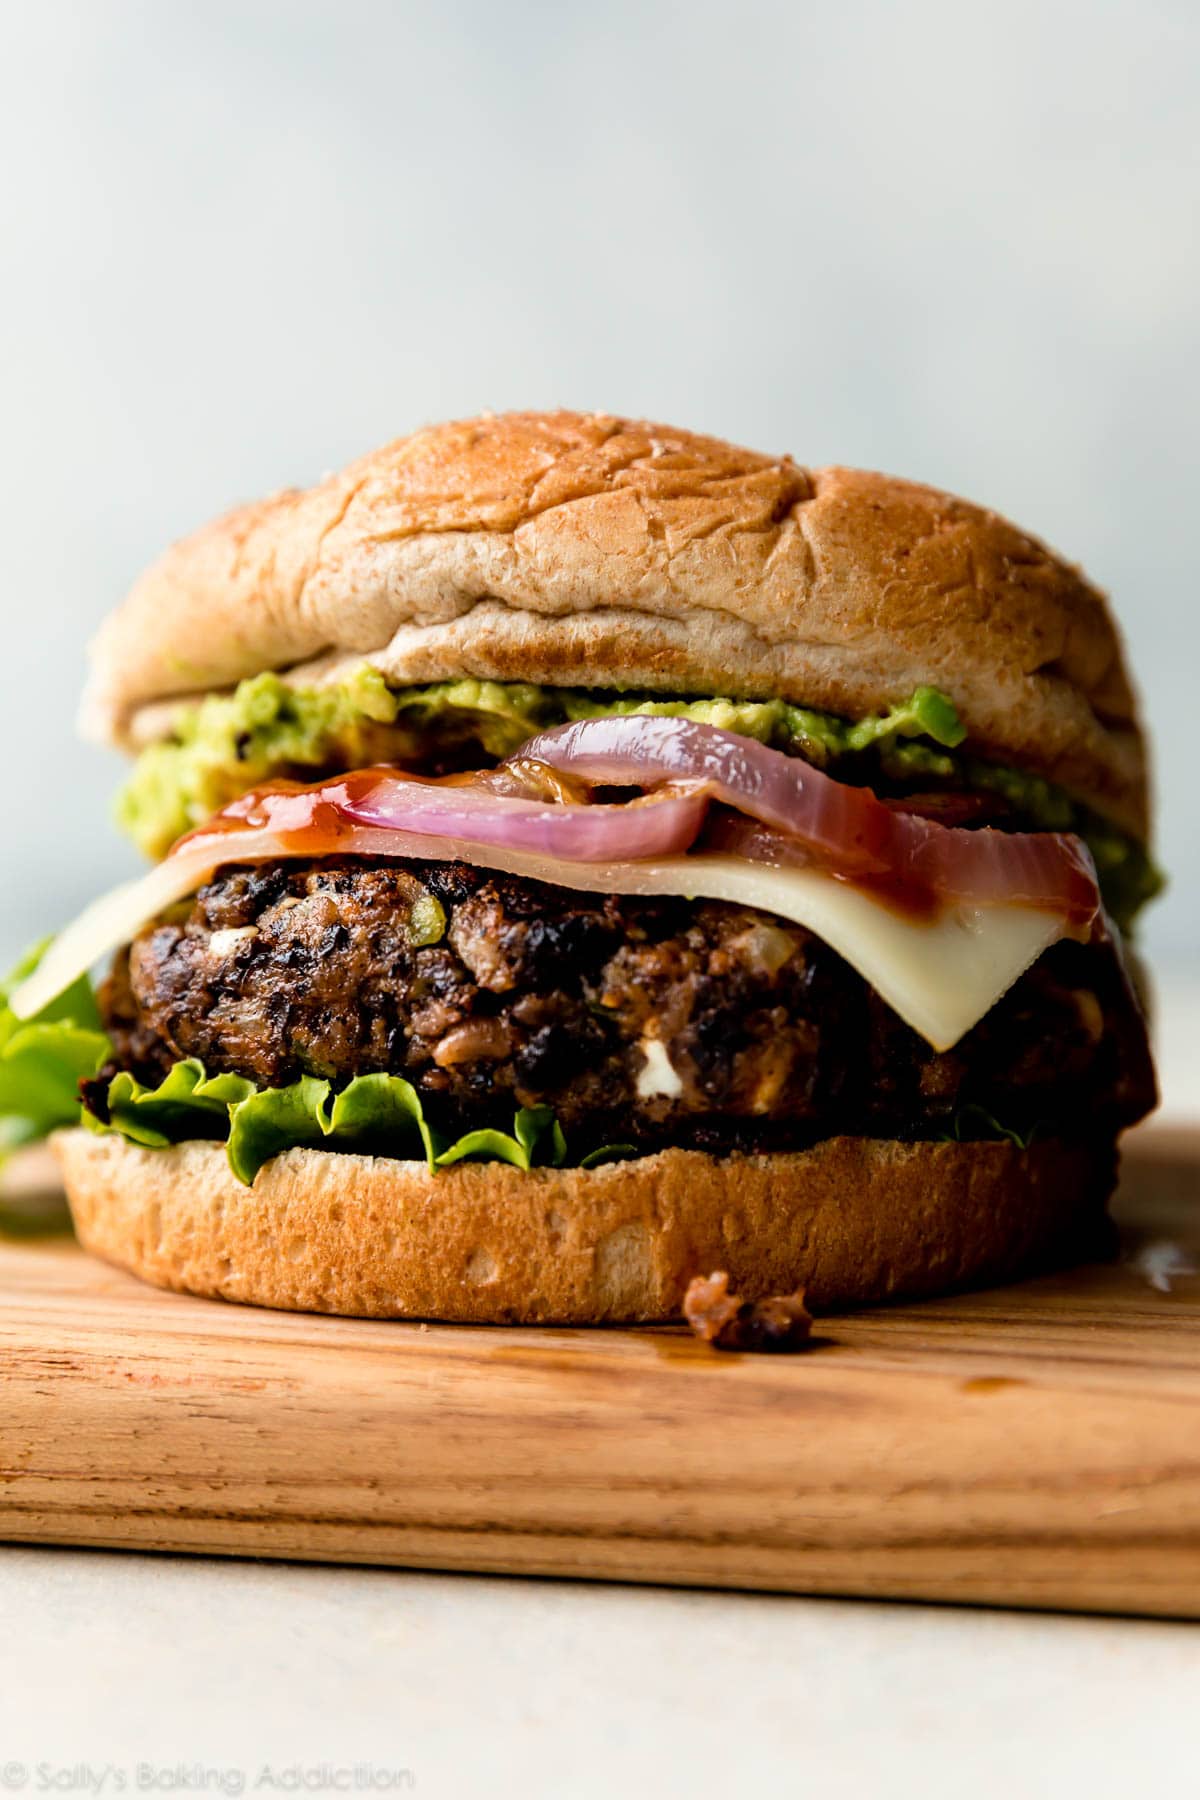 Black bean burger with guacamole and red onions.